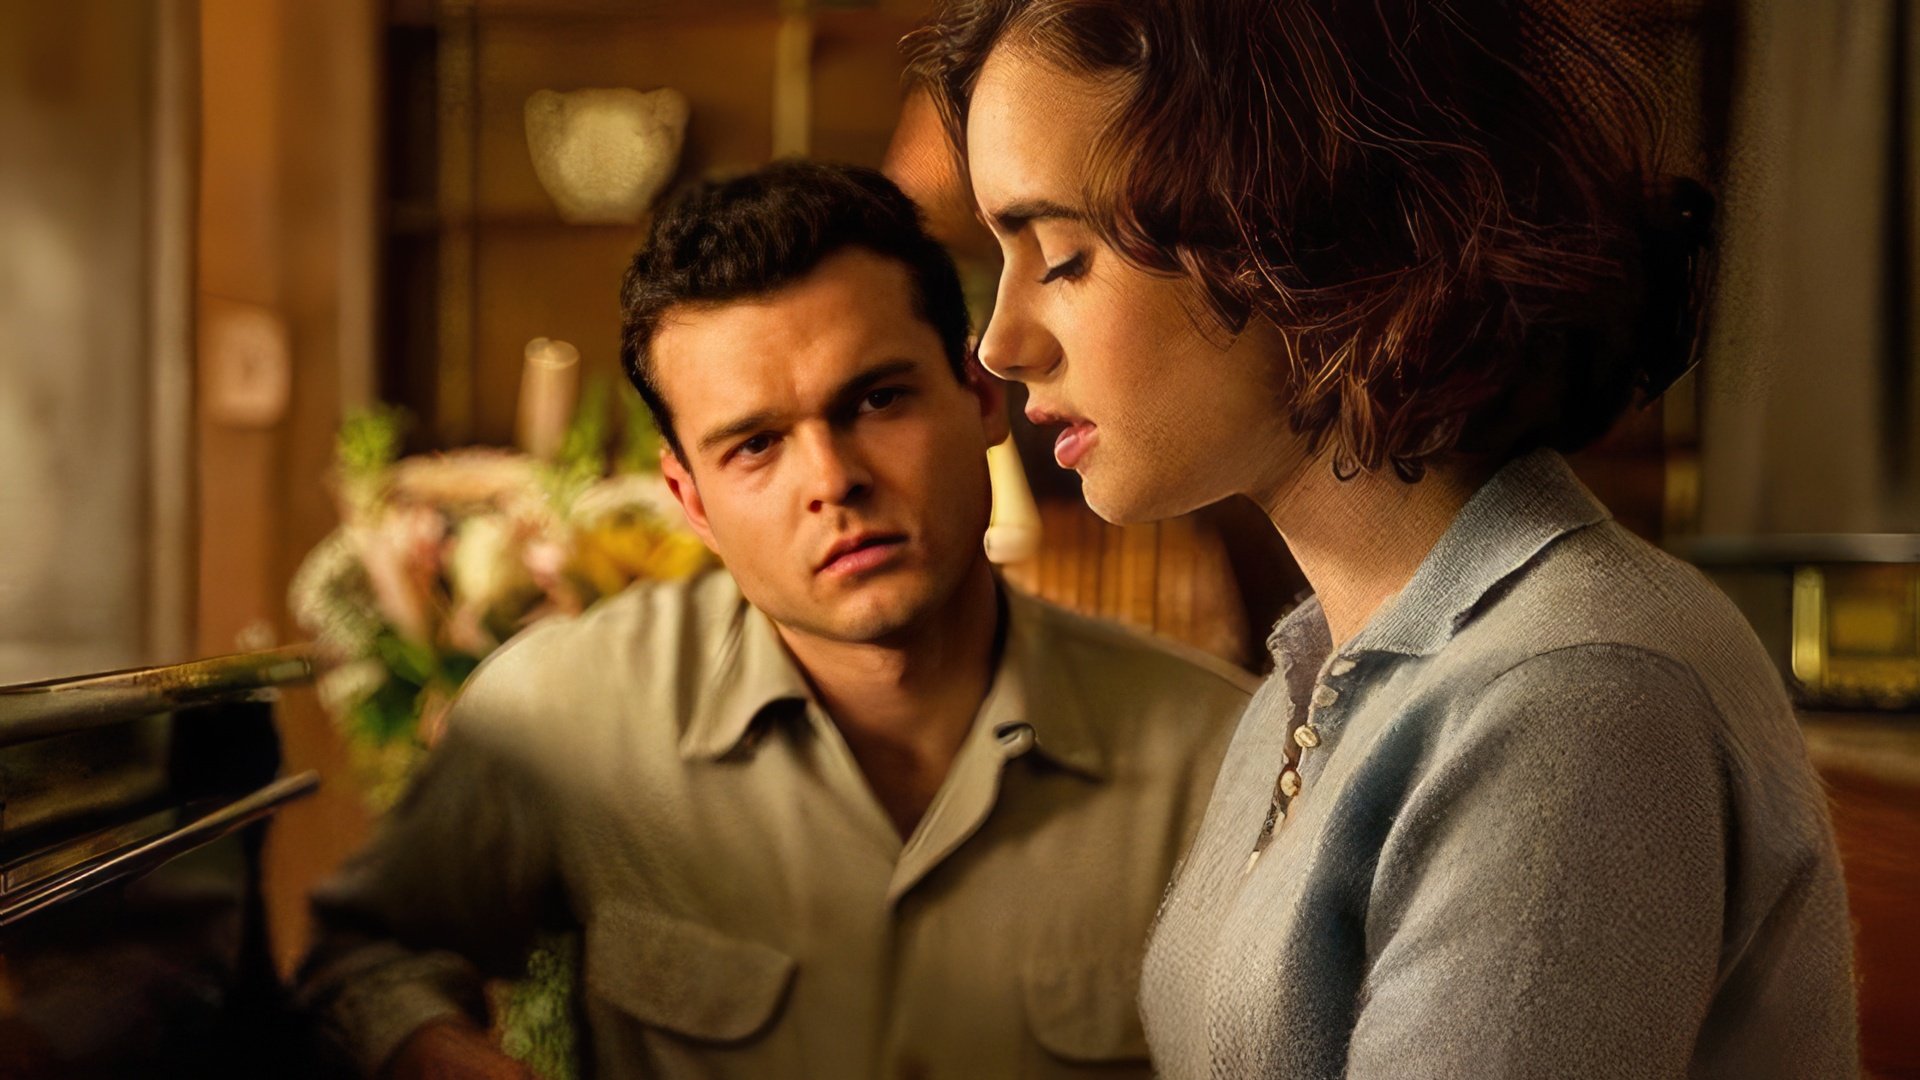 Alden Ehrenreich and Lily Collins in 'Rules Don't Apply'